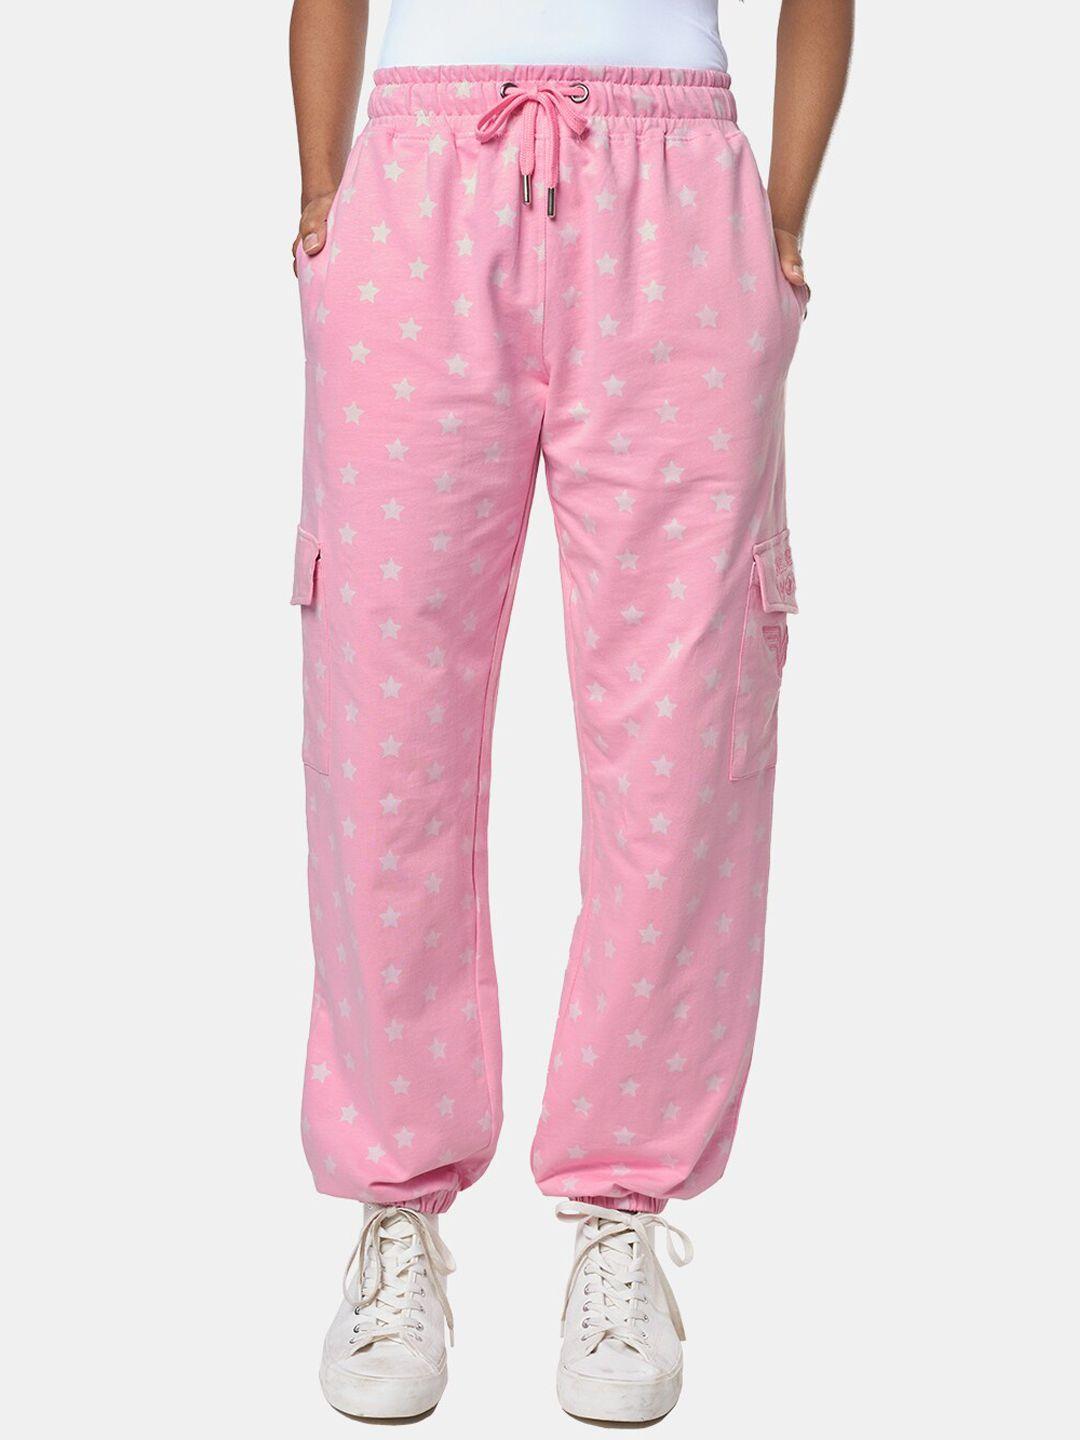 the souled store women pink printed cotton jogger track pants